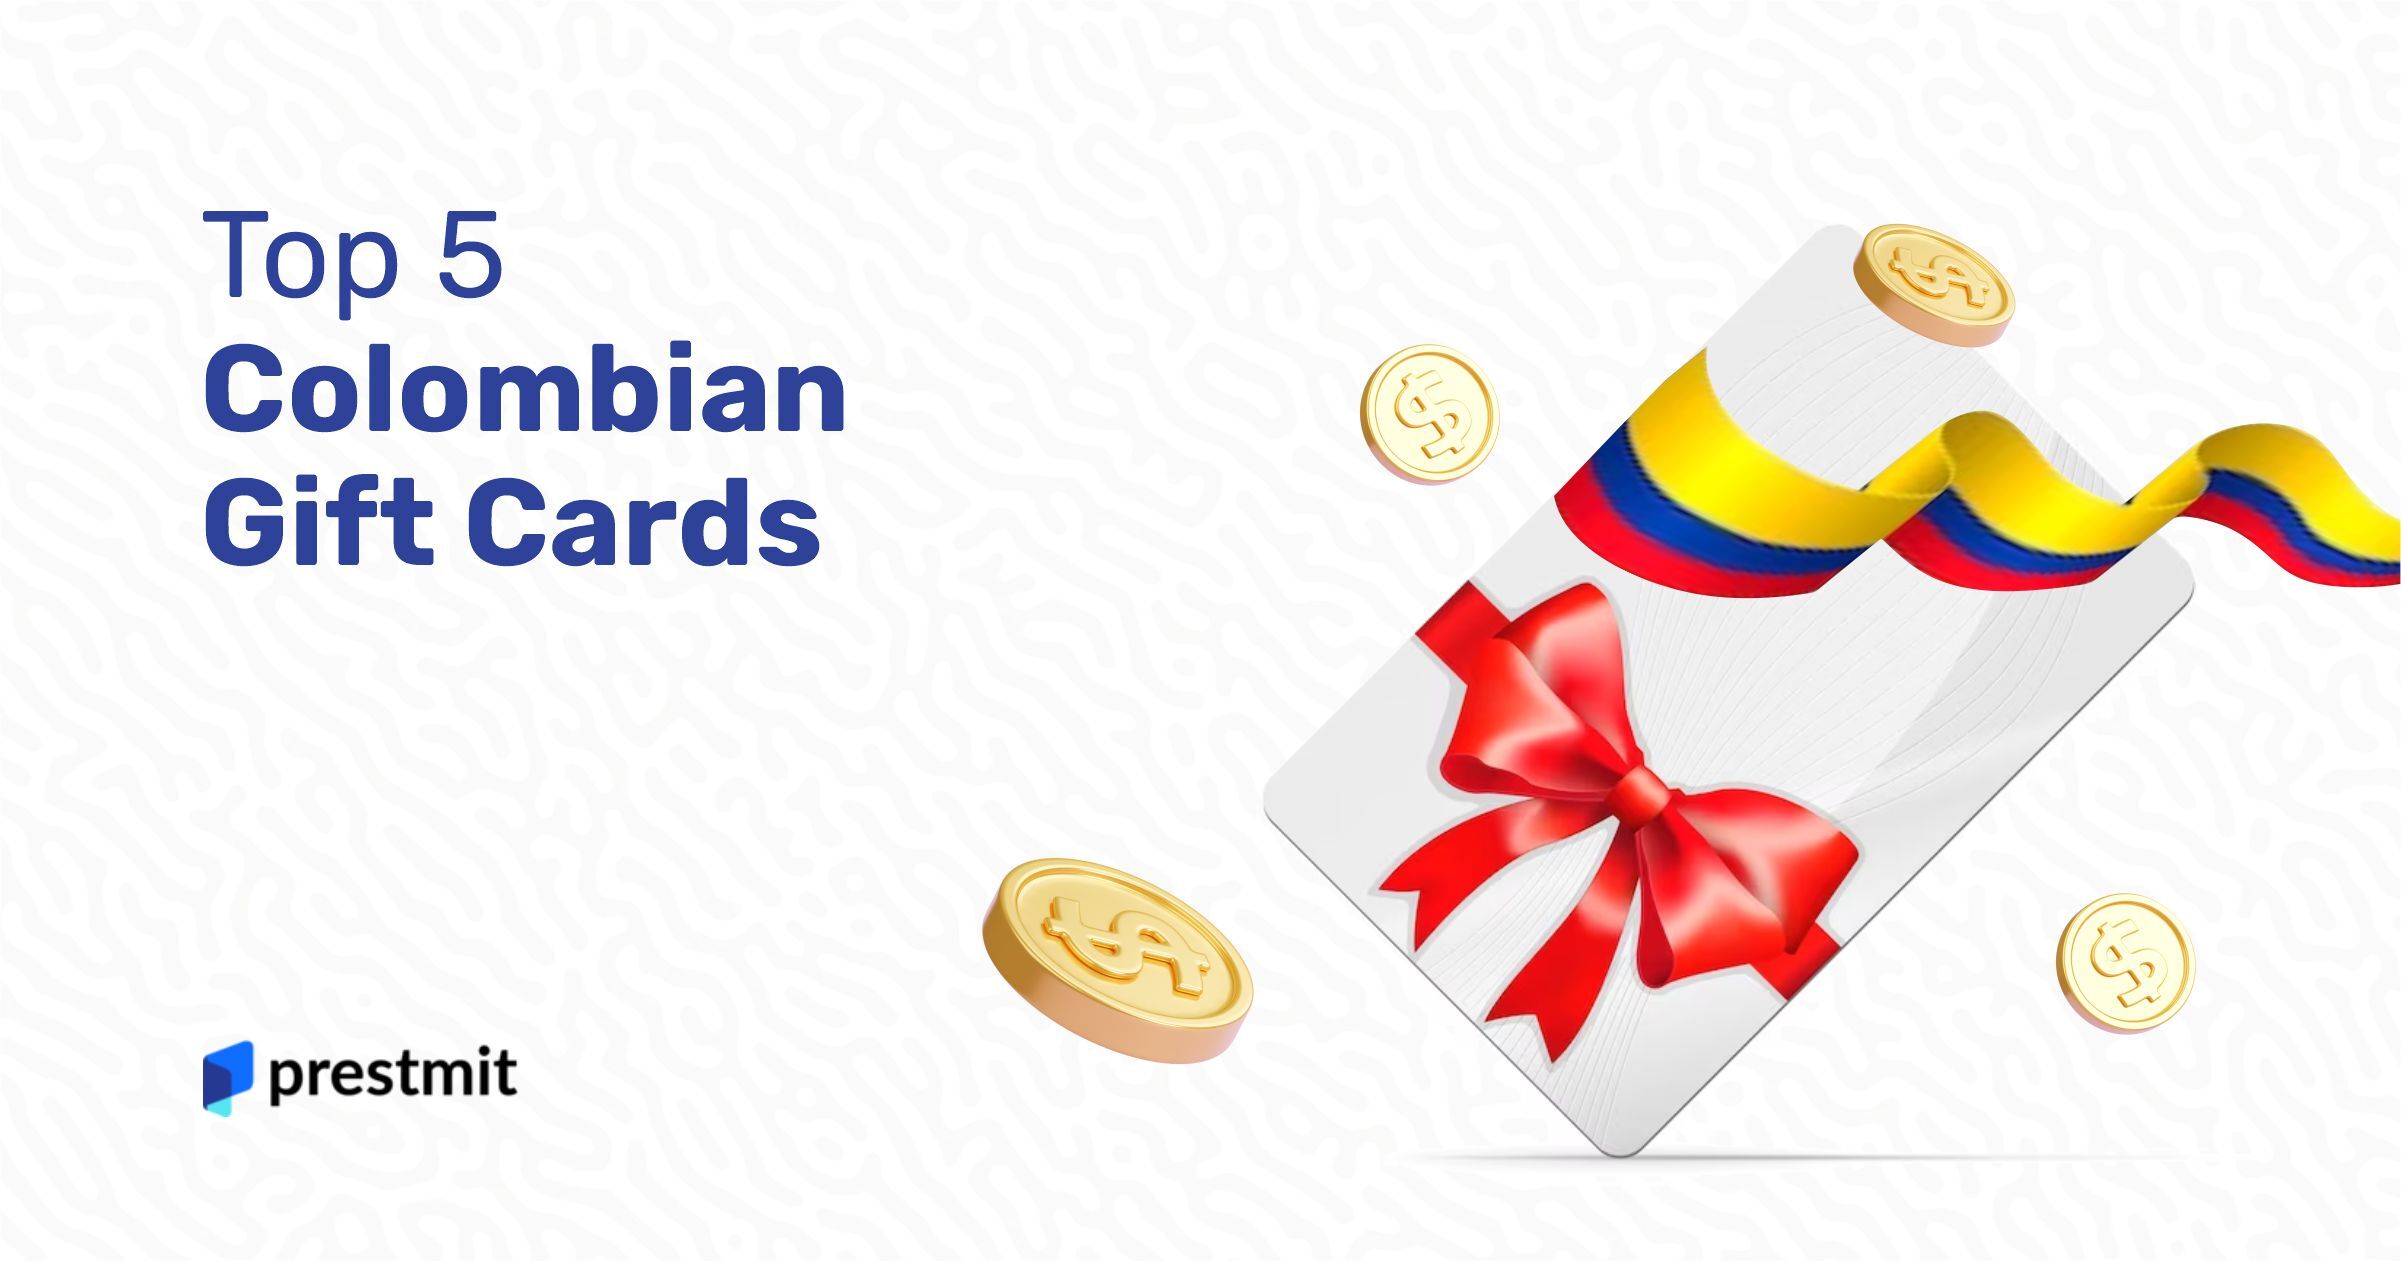 Exploring The Top 5 Most Popular Gift Cards in Colombia